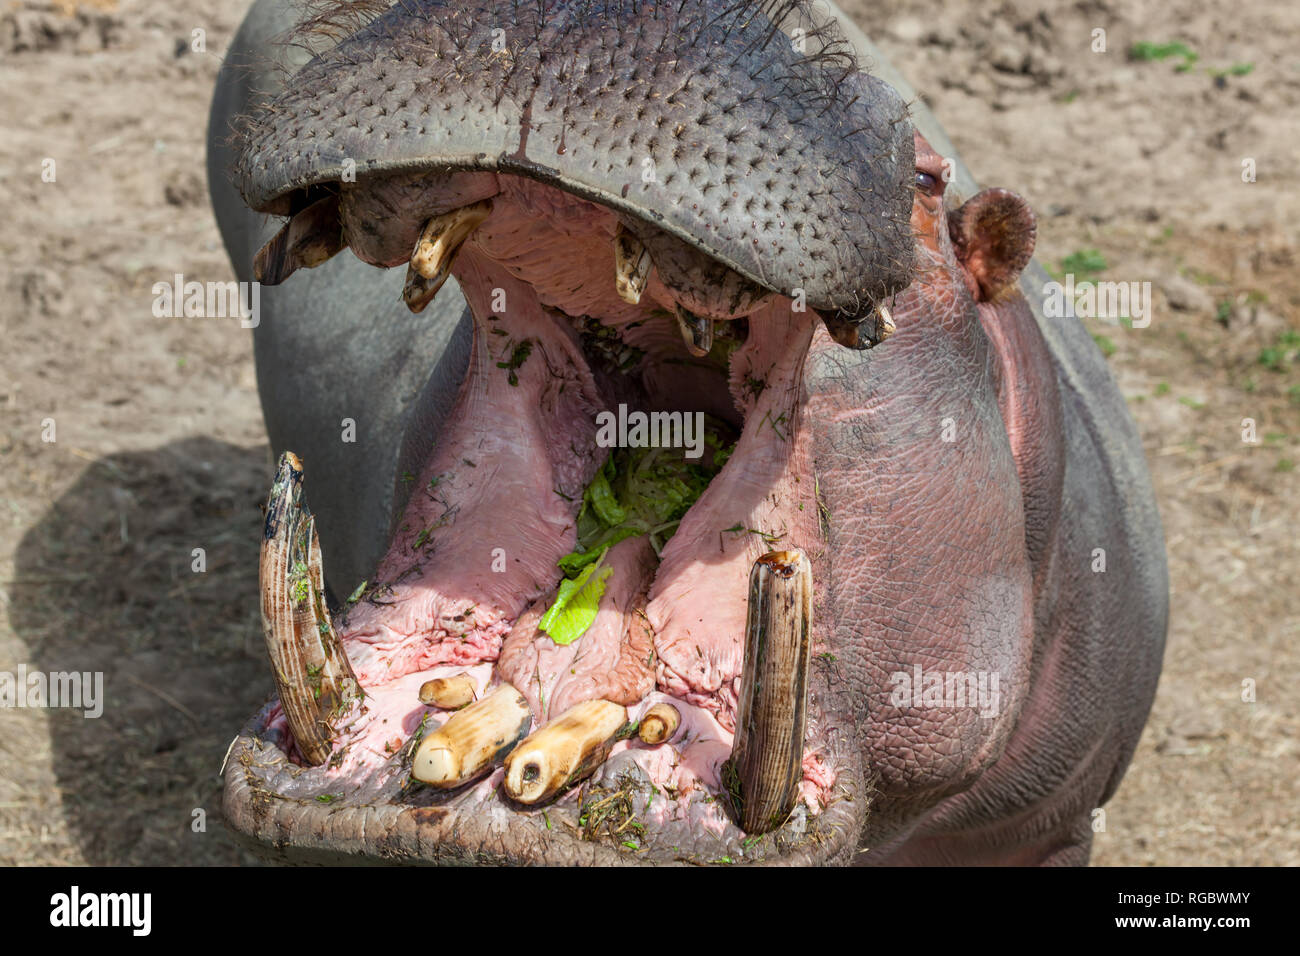 A large hippopotamus with its mouth open showing its teeth and tusks  waiting for more treats Stock Photo - Alamy